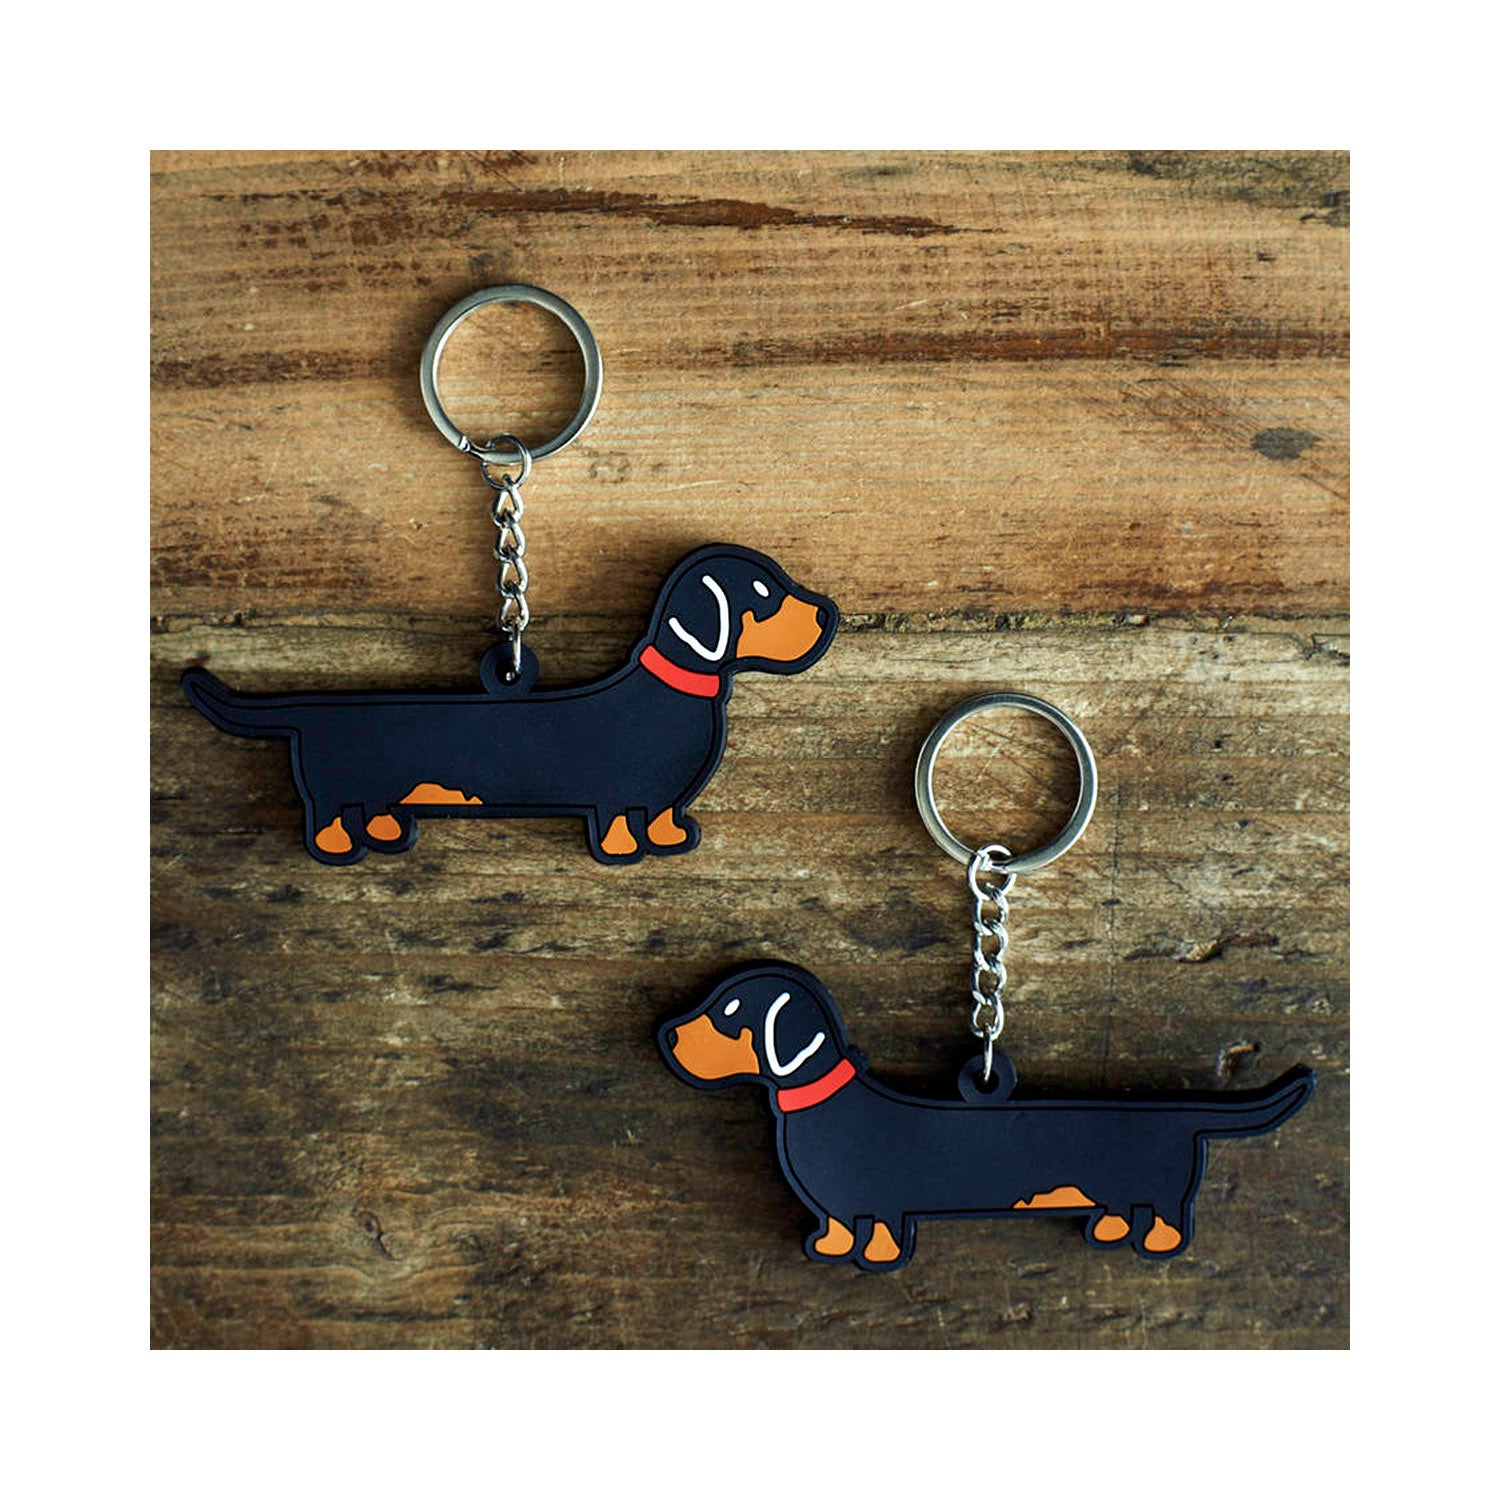 Dog Lover Gifts available at Dog Krazy Gifts - Florence The Dachshund Keyring- part of the Sweet William range available from Dog Krazy Gifts